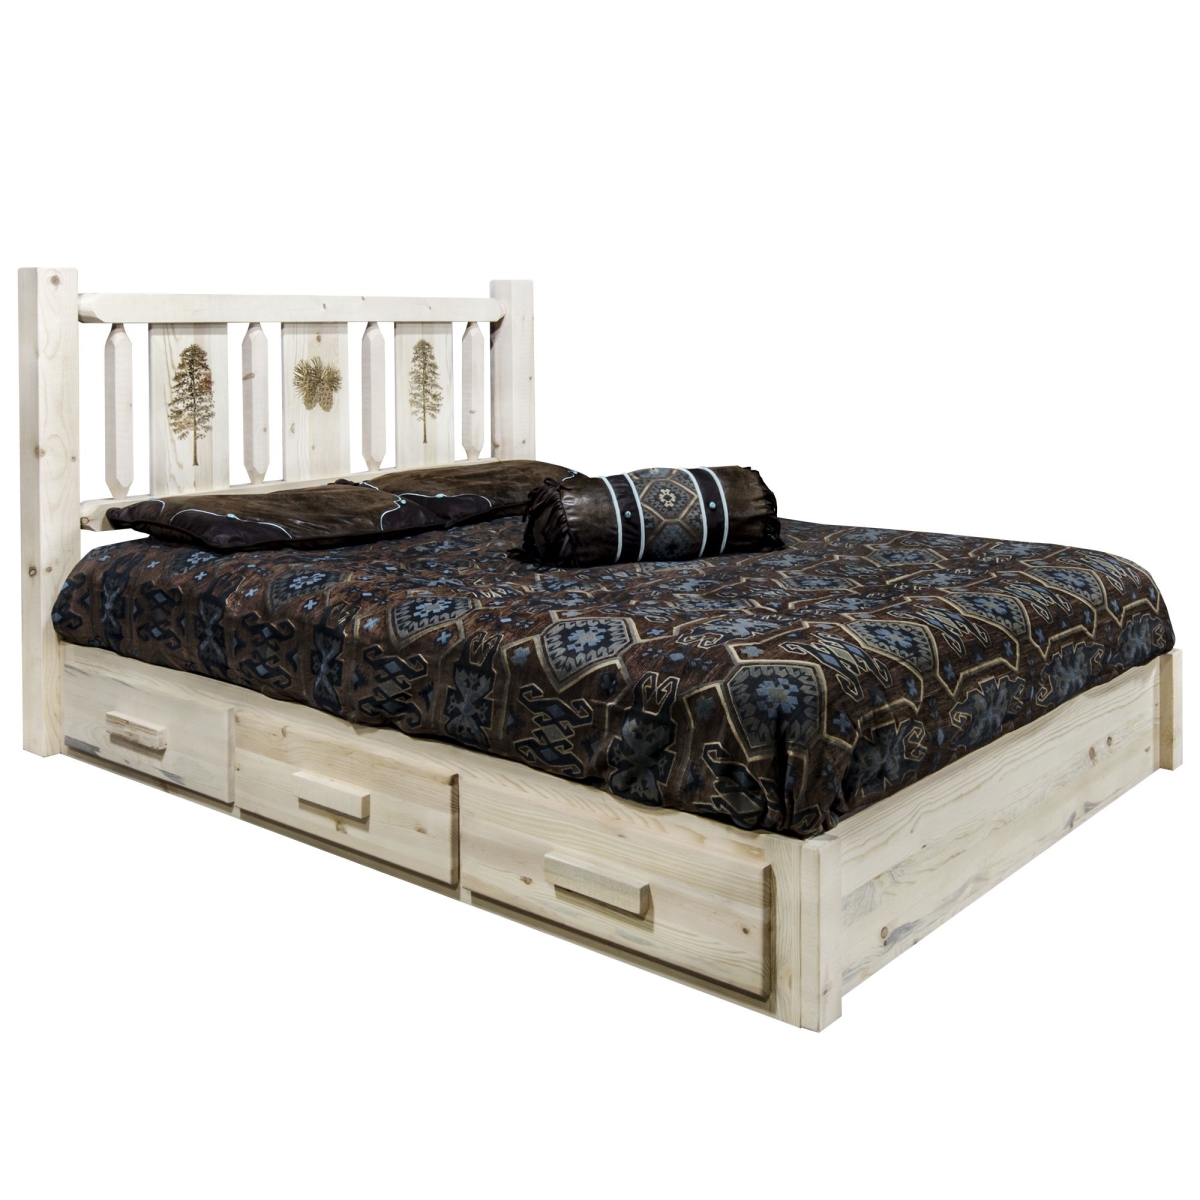 Homestead Collection Platform Bed with Storage, Twin Size with Laser Engraved Pine Design, Ready to Finish -  D2D Technologies, D23082617